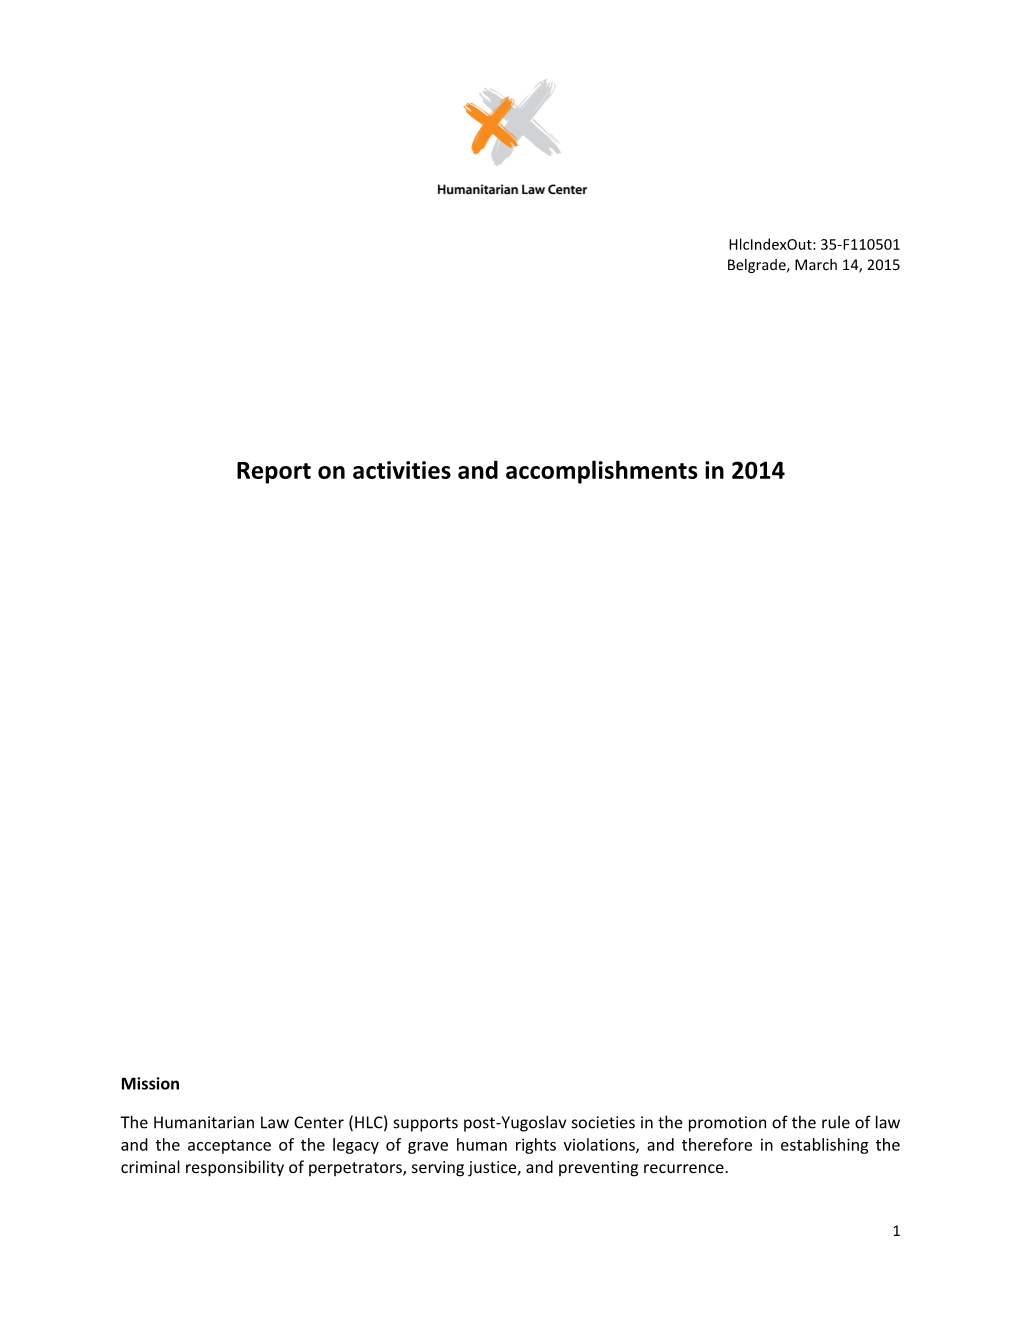 Report on Activities and Accomplishments in 2014